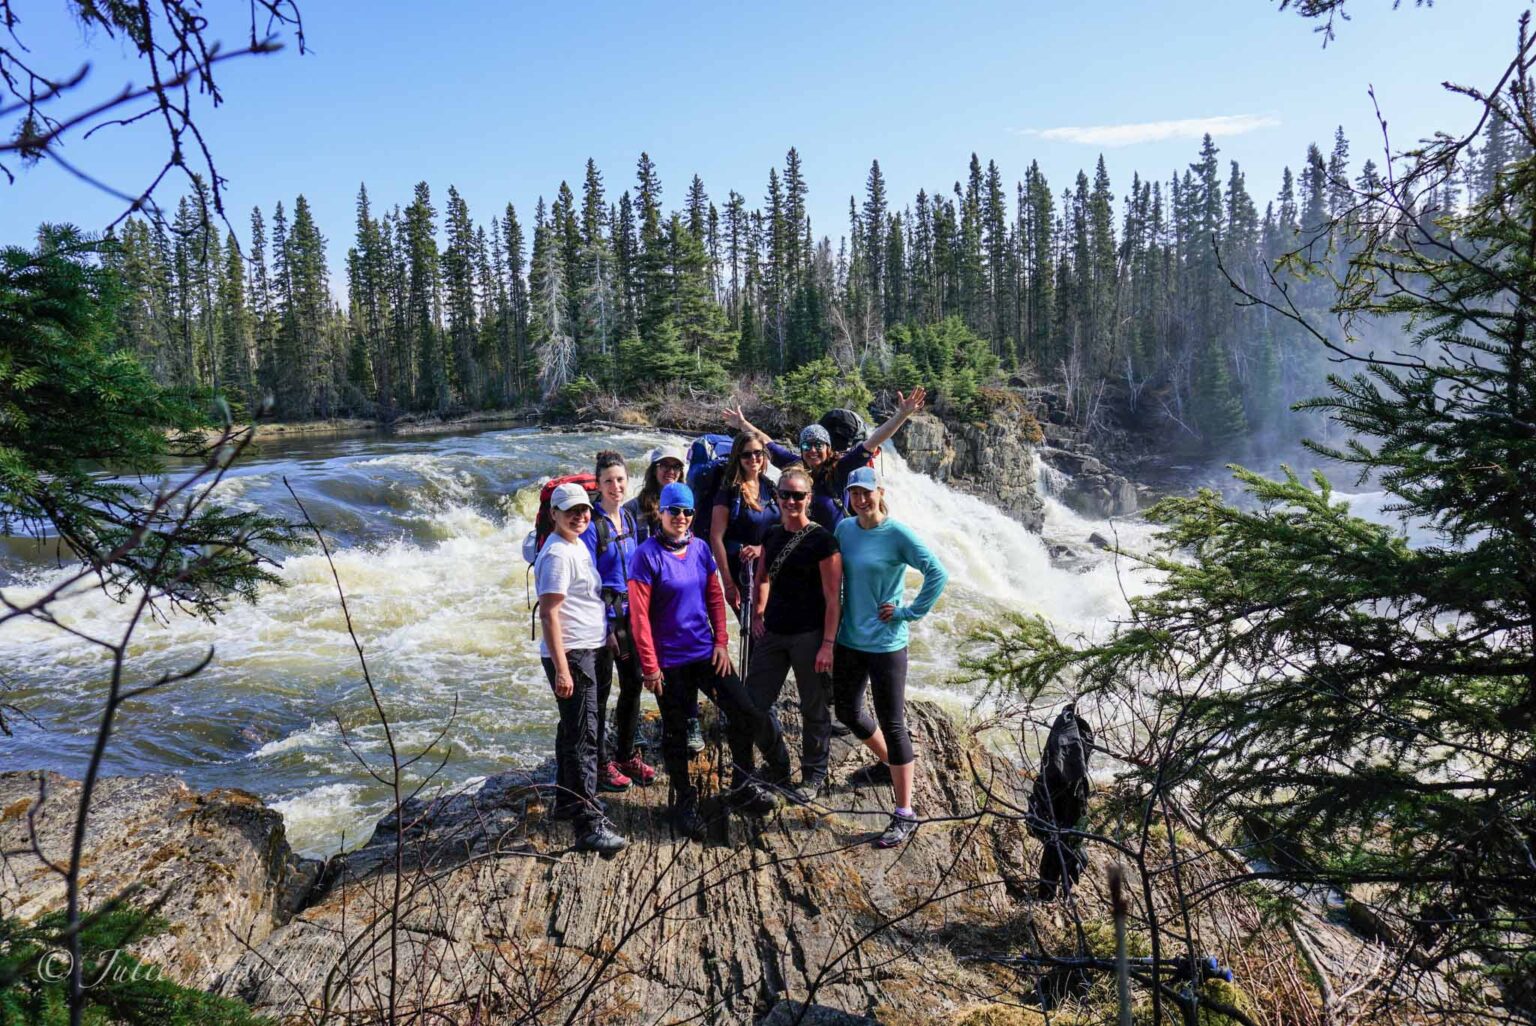 Image of a group of hikers standing on a rocky outcrop before a waterfall surrounded by forest. Practicing safety while recreating and hiking in groups lends to sustainability as well.